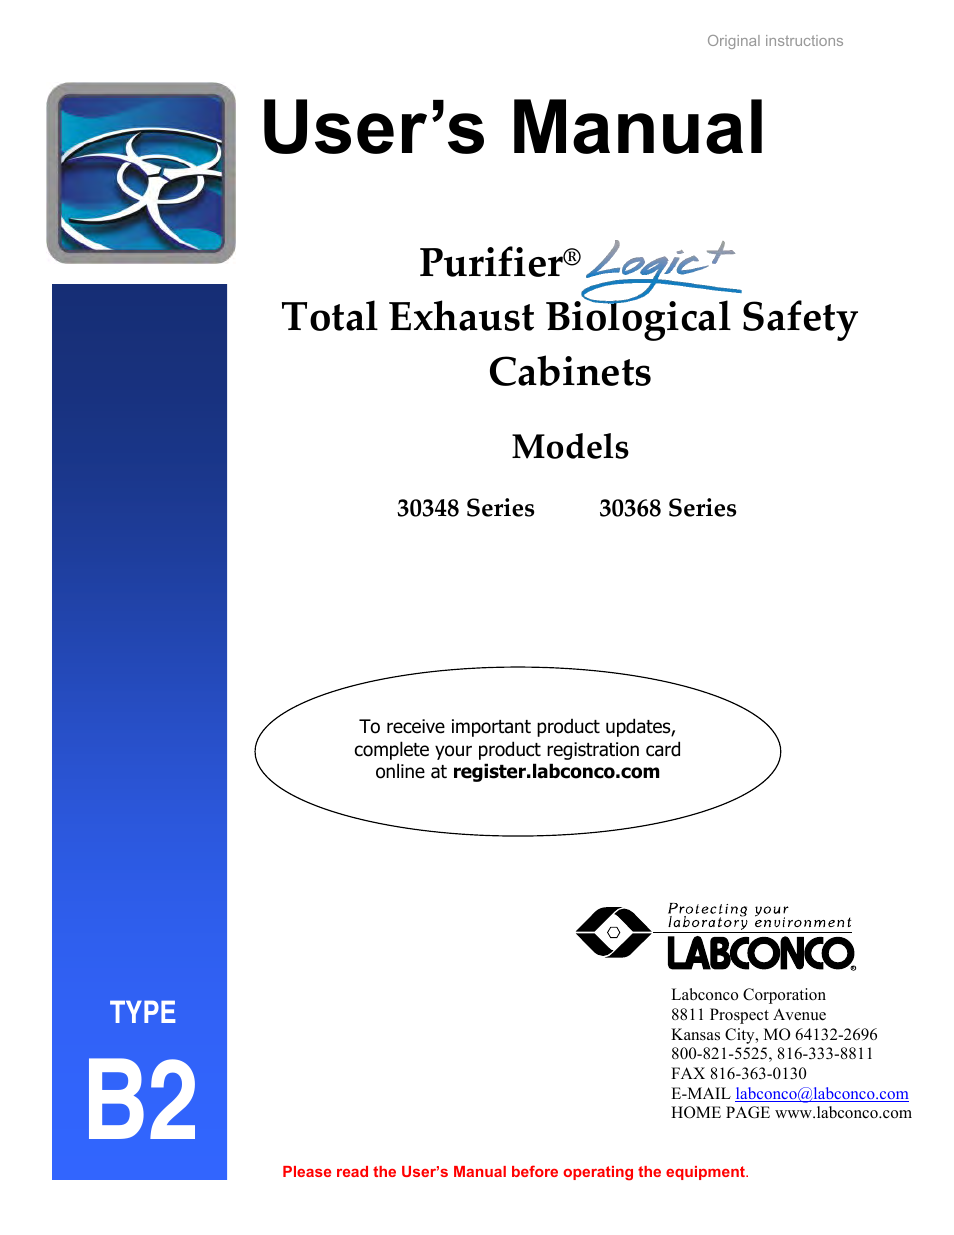 Total Exhaust Biological Safety Cabinets 30348 Series